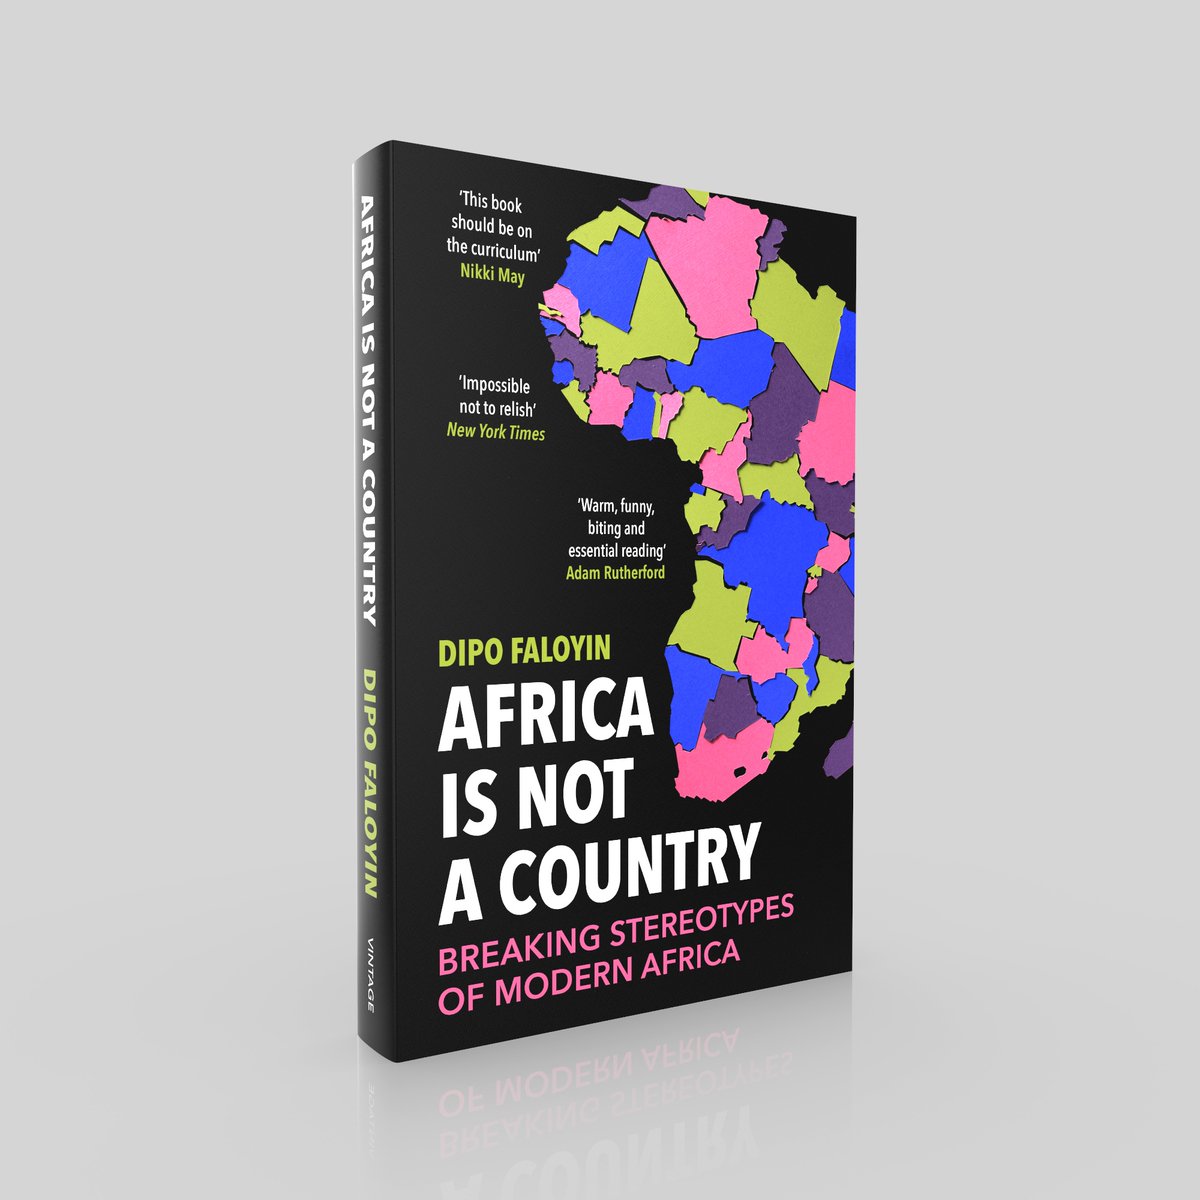 🚨Very happy to share the paperback cover of AFRICA IS NOT A COUNTRY, out on April 6th. I'm really grateful for the kind reviews from so many people I admire. Pre-order here: penguin.co.uk/books/444389/a… Discounts for school orders are available if you reach out to me directly.